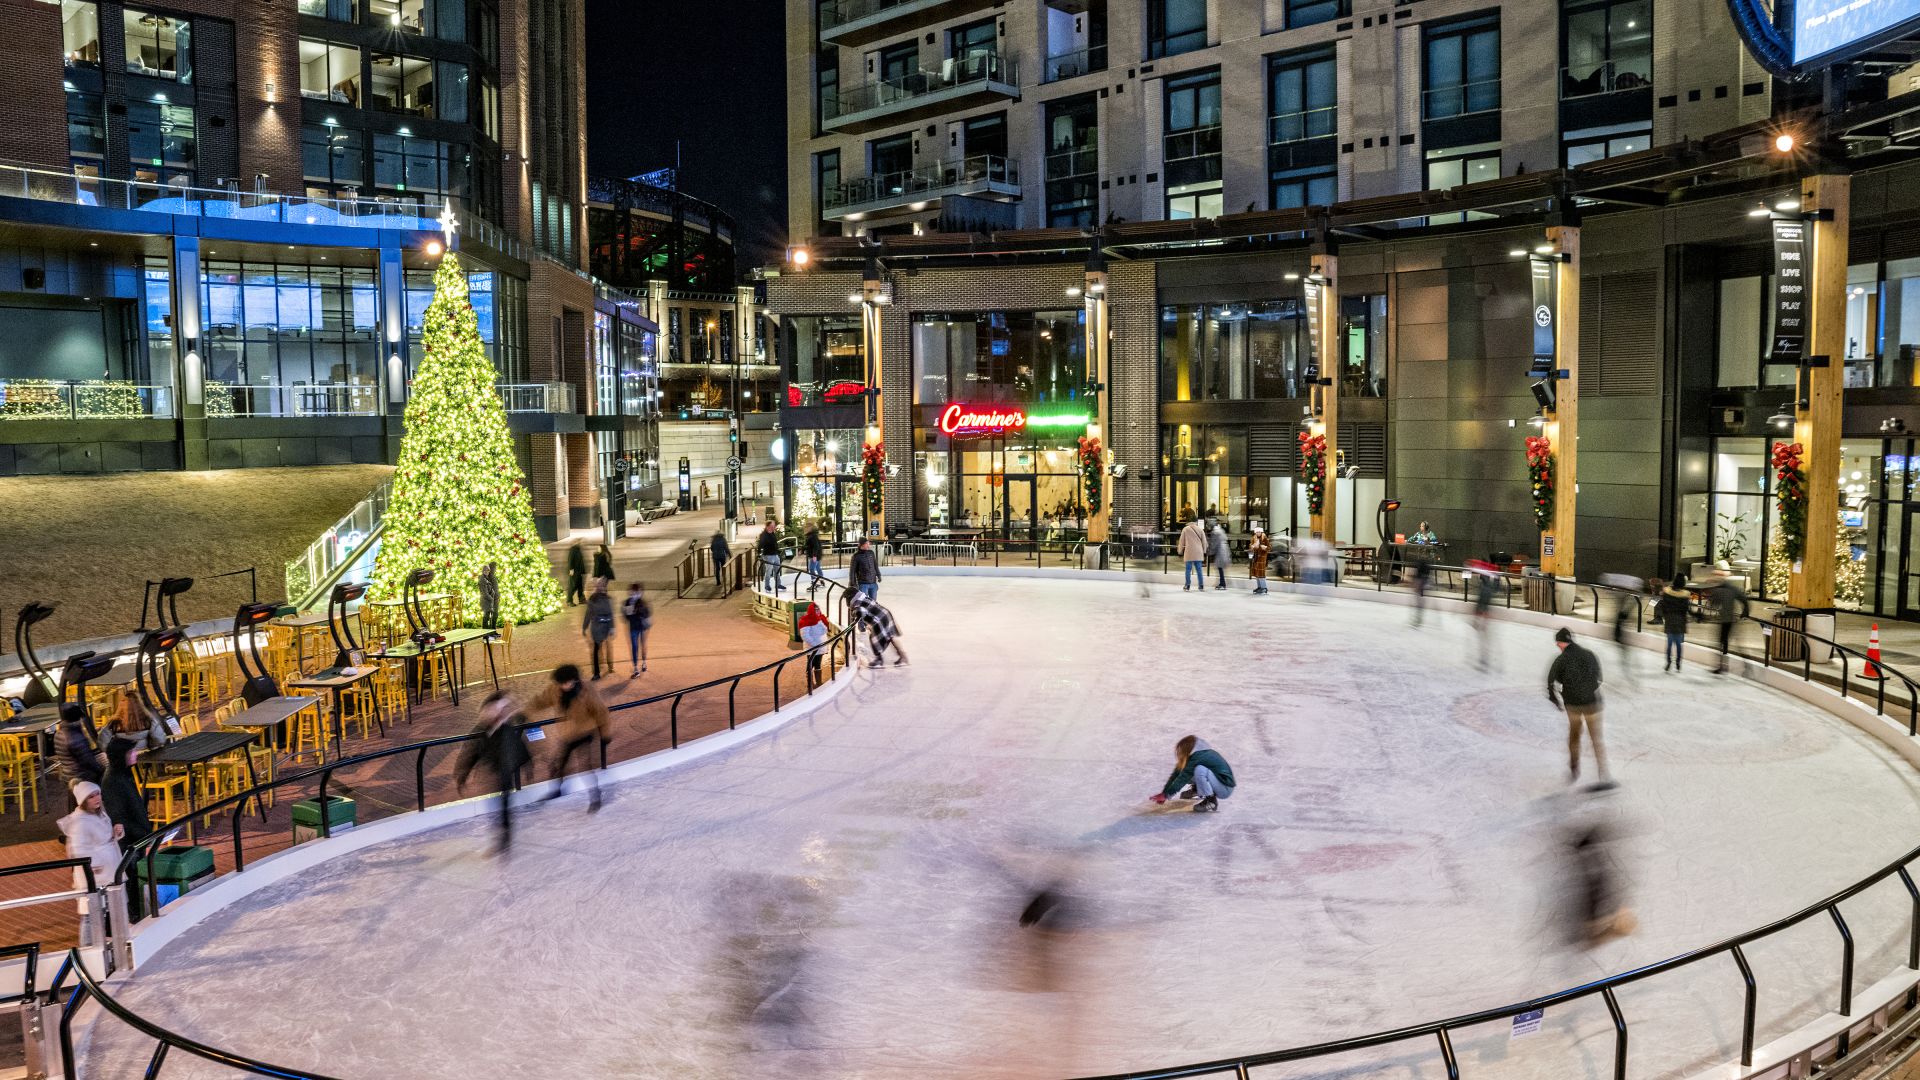 A Group Of People Playing In A Plaza With A Christmas Tree